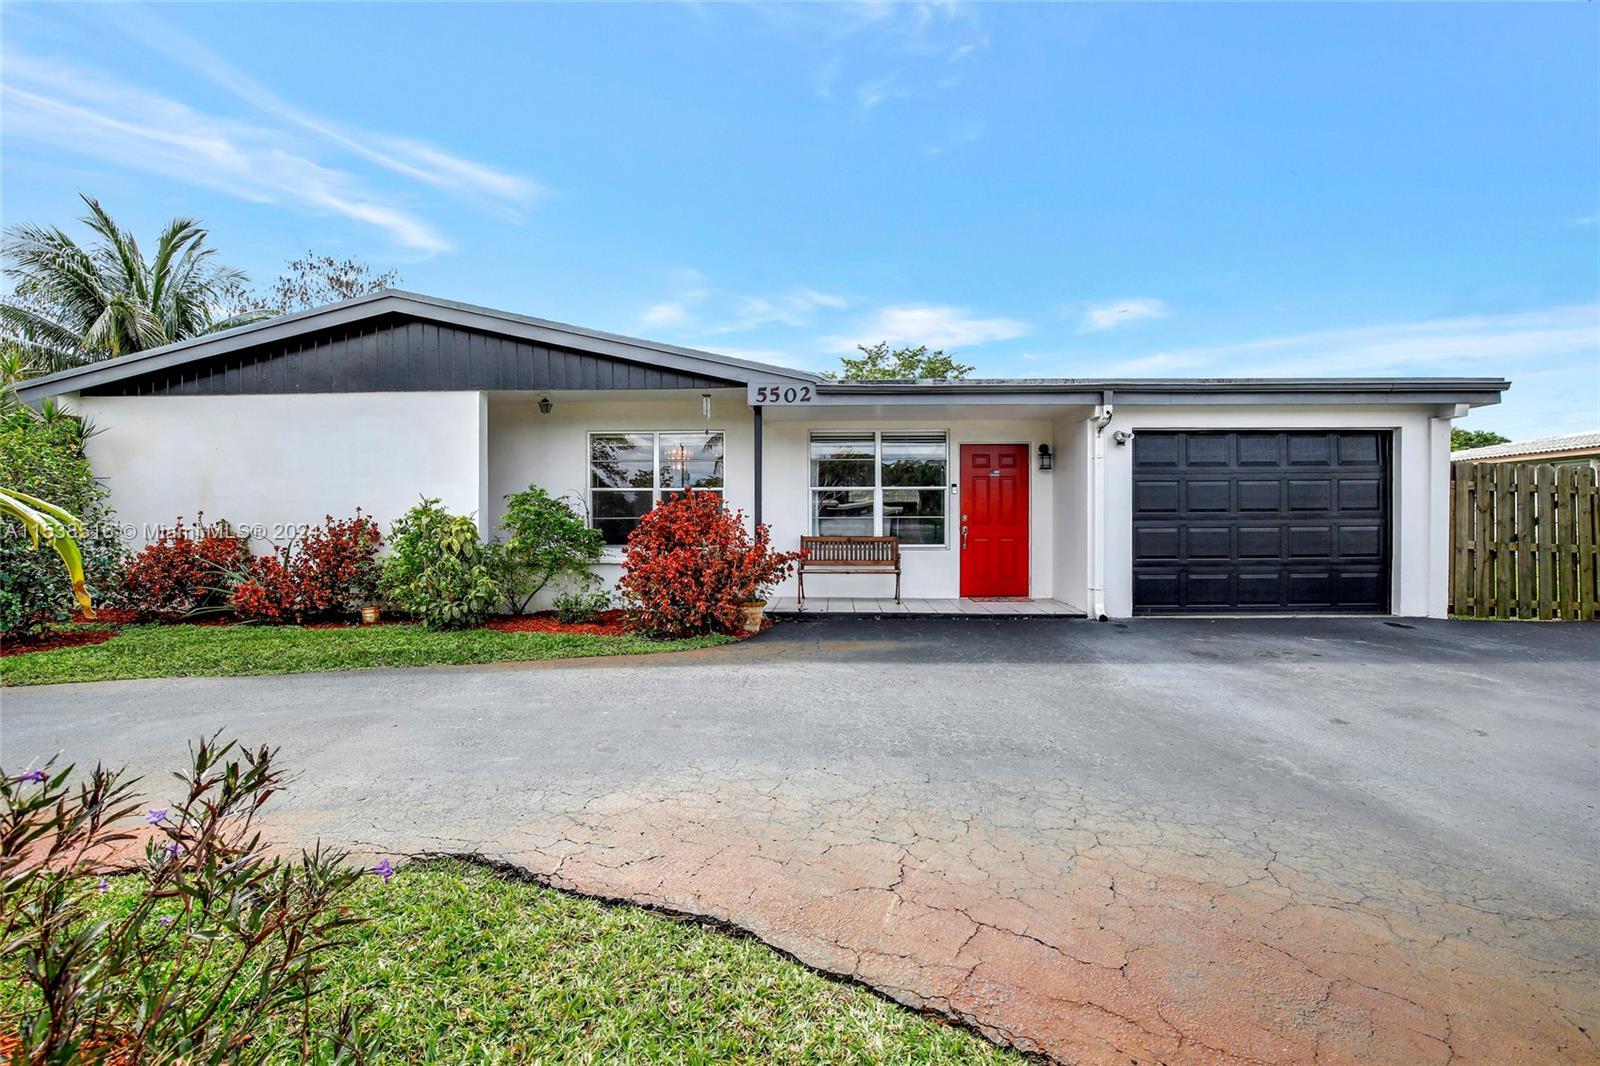 Welcome to this single family home nestled inside the desirable neighborhood of Plantation Park! Boa